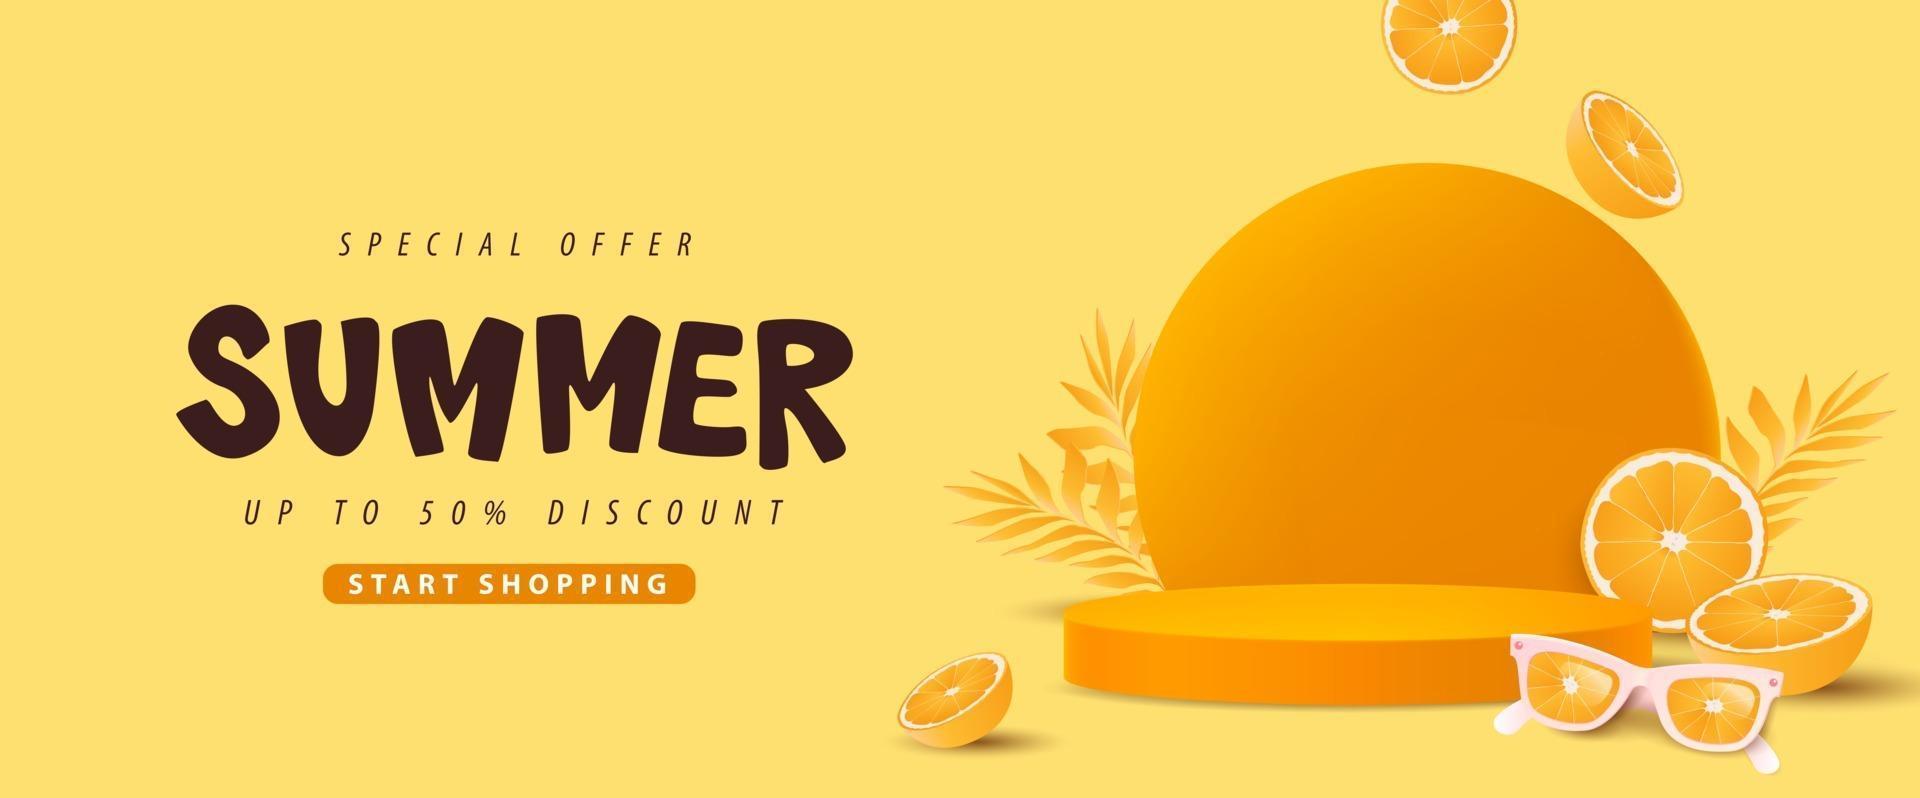 Colorful Summer sale banner with orange concept product display cylindrical shape vector